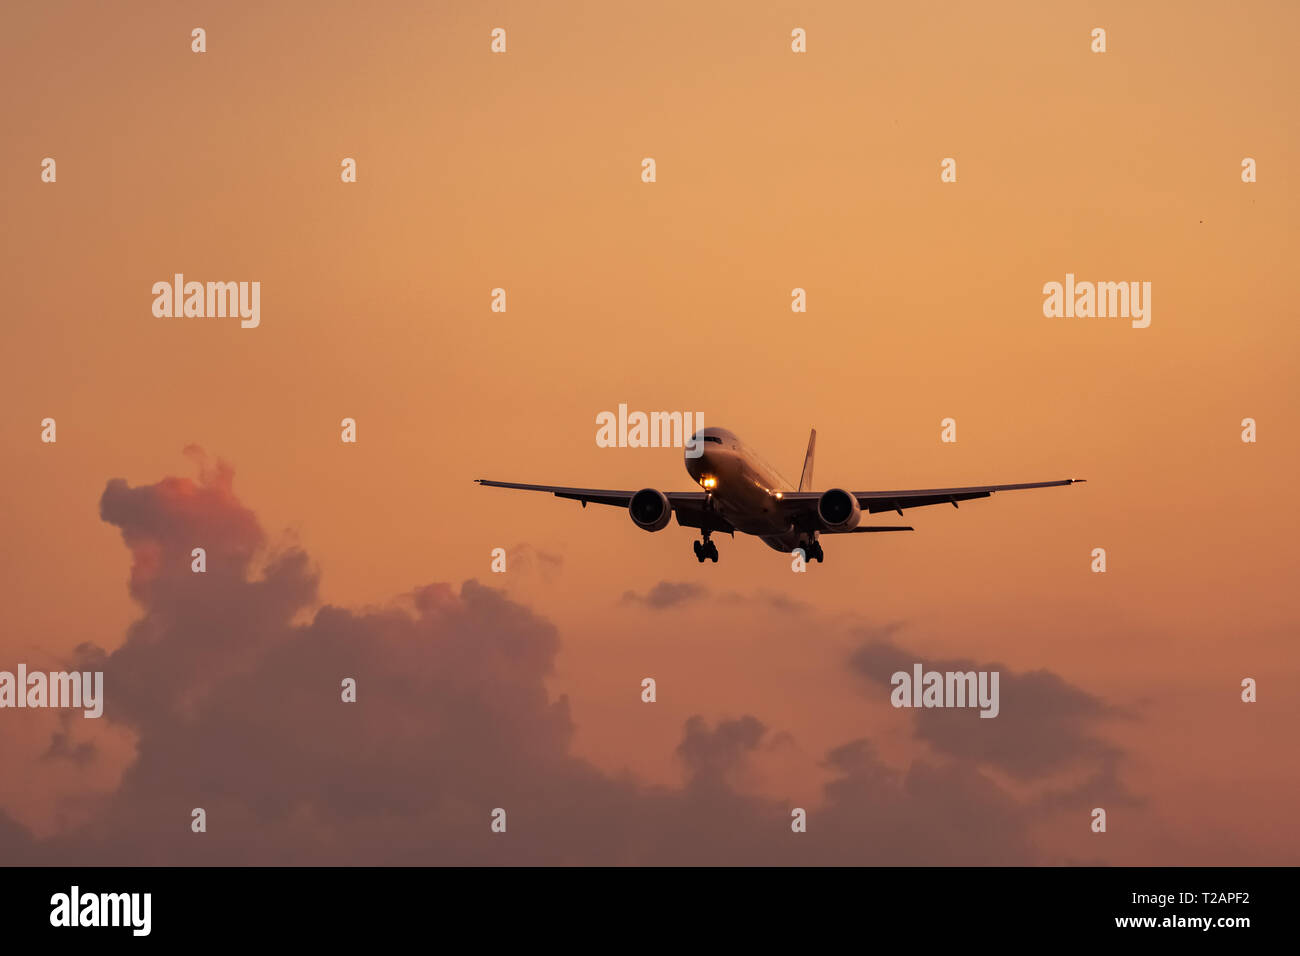 Commercial airline. Passenger plane landing at airport with beautiful sunset  sky and clouds. Arrival flight. Airplane flying in a line for landing. Stock Photo